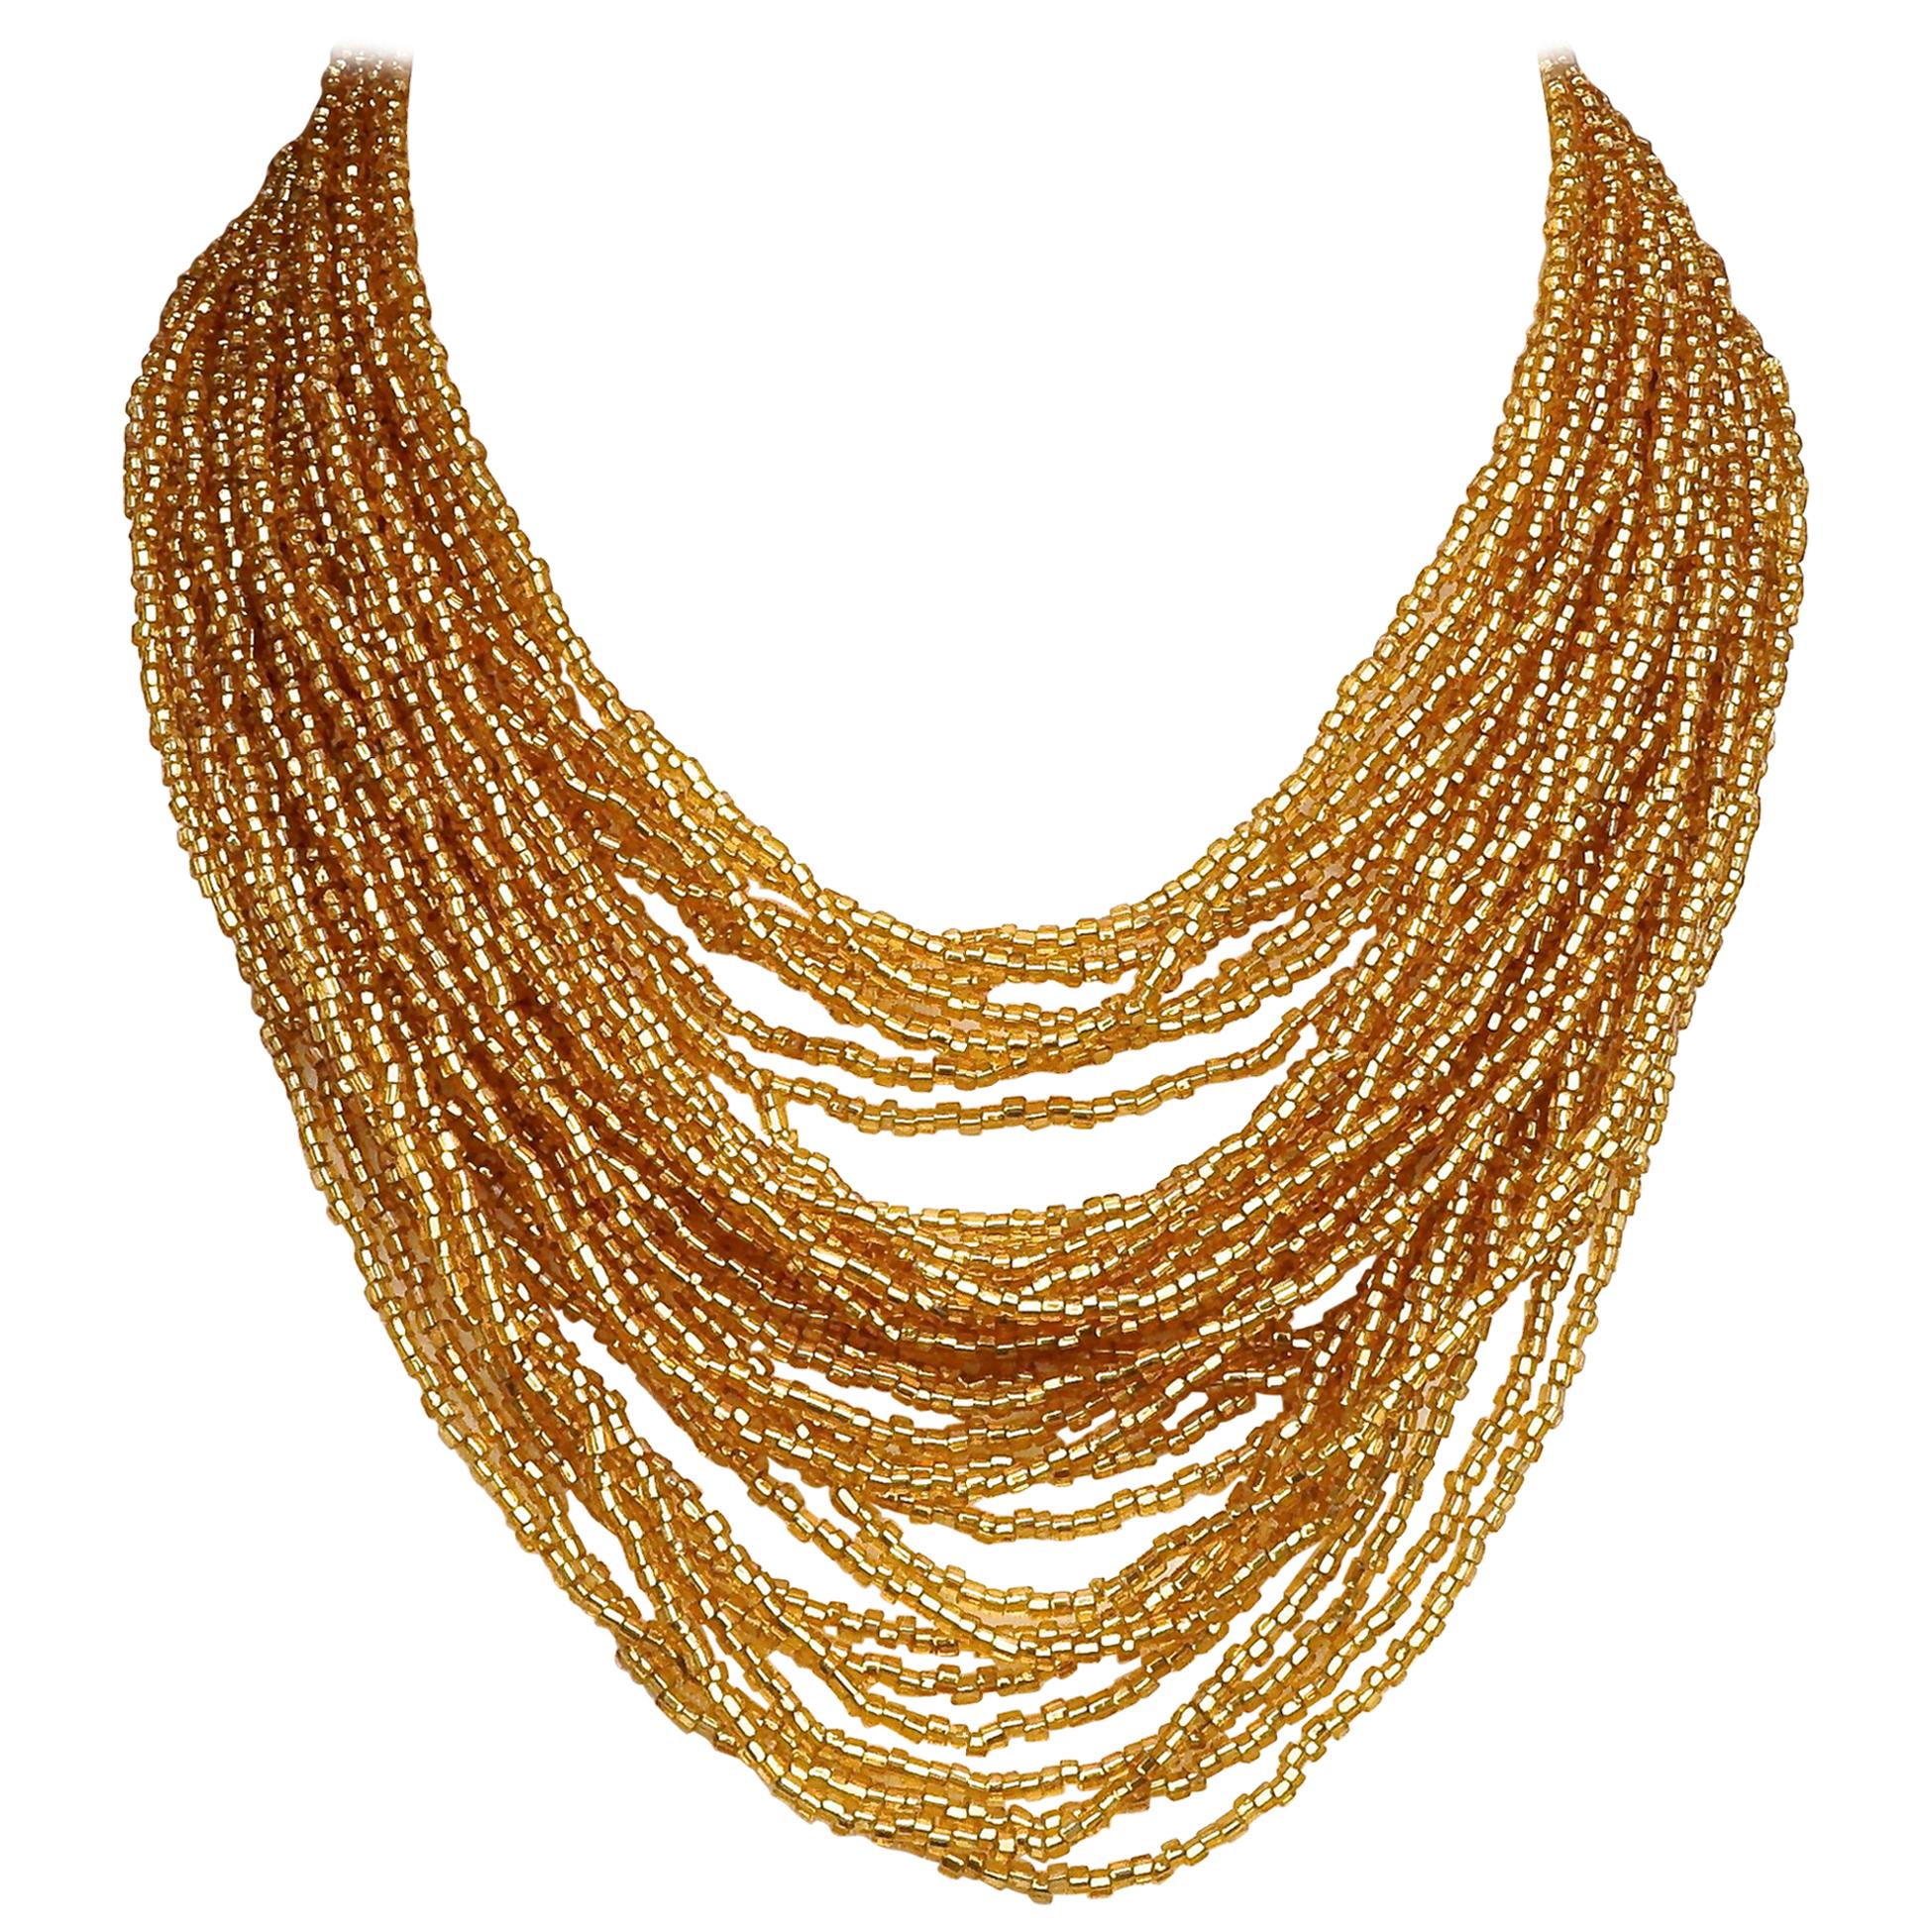 Multi Strand Gold Glass Bead Necklace with Beaded Clasp circa 1960s